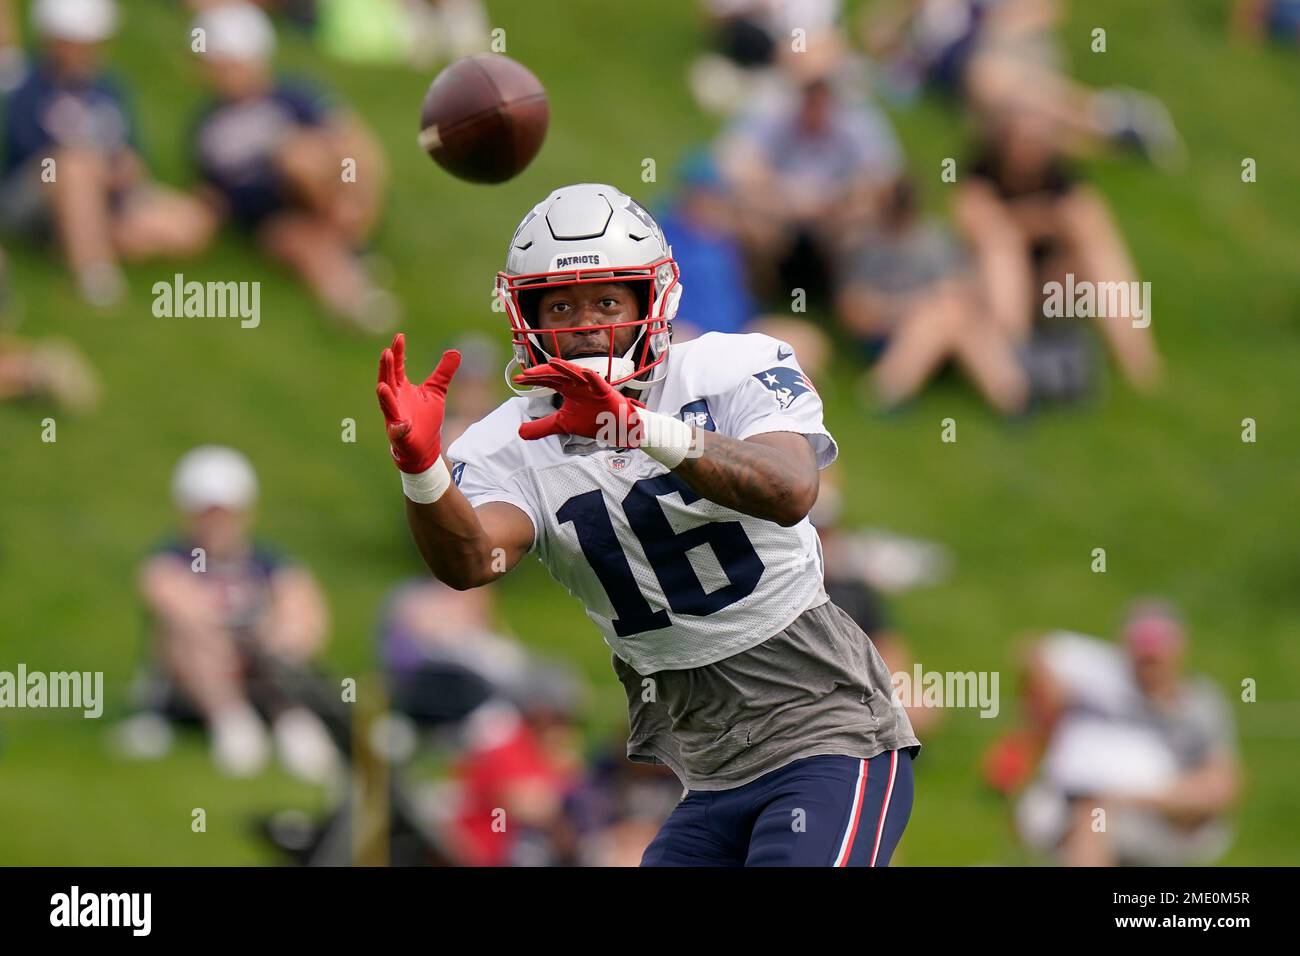 New England Patriots wide receiver Jakobi Meyers catches the ball